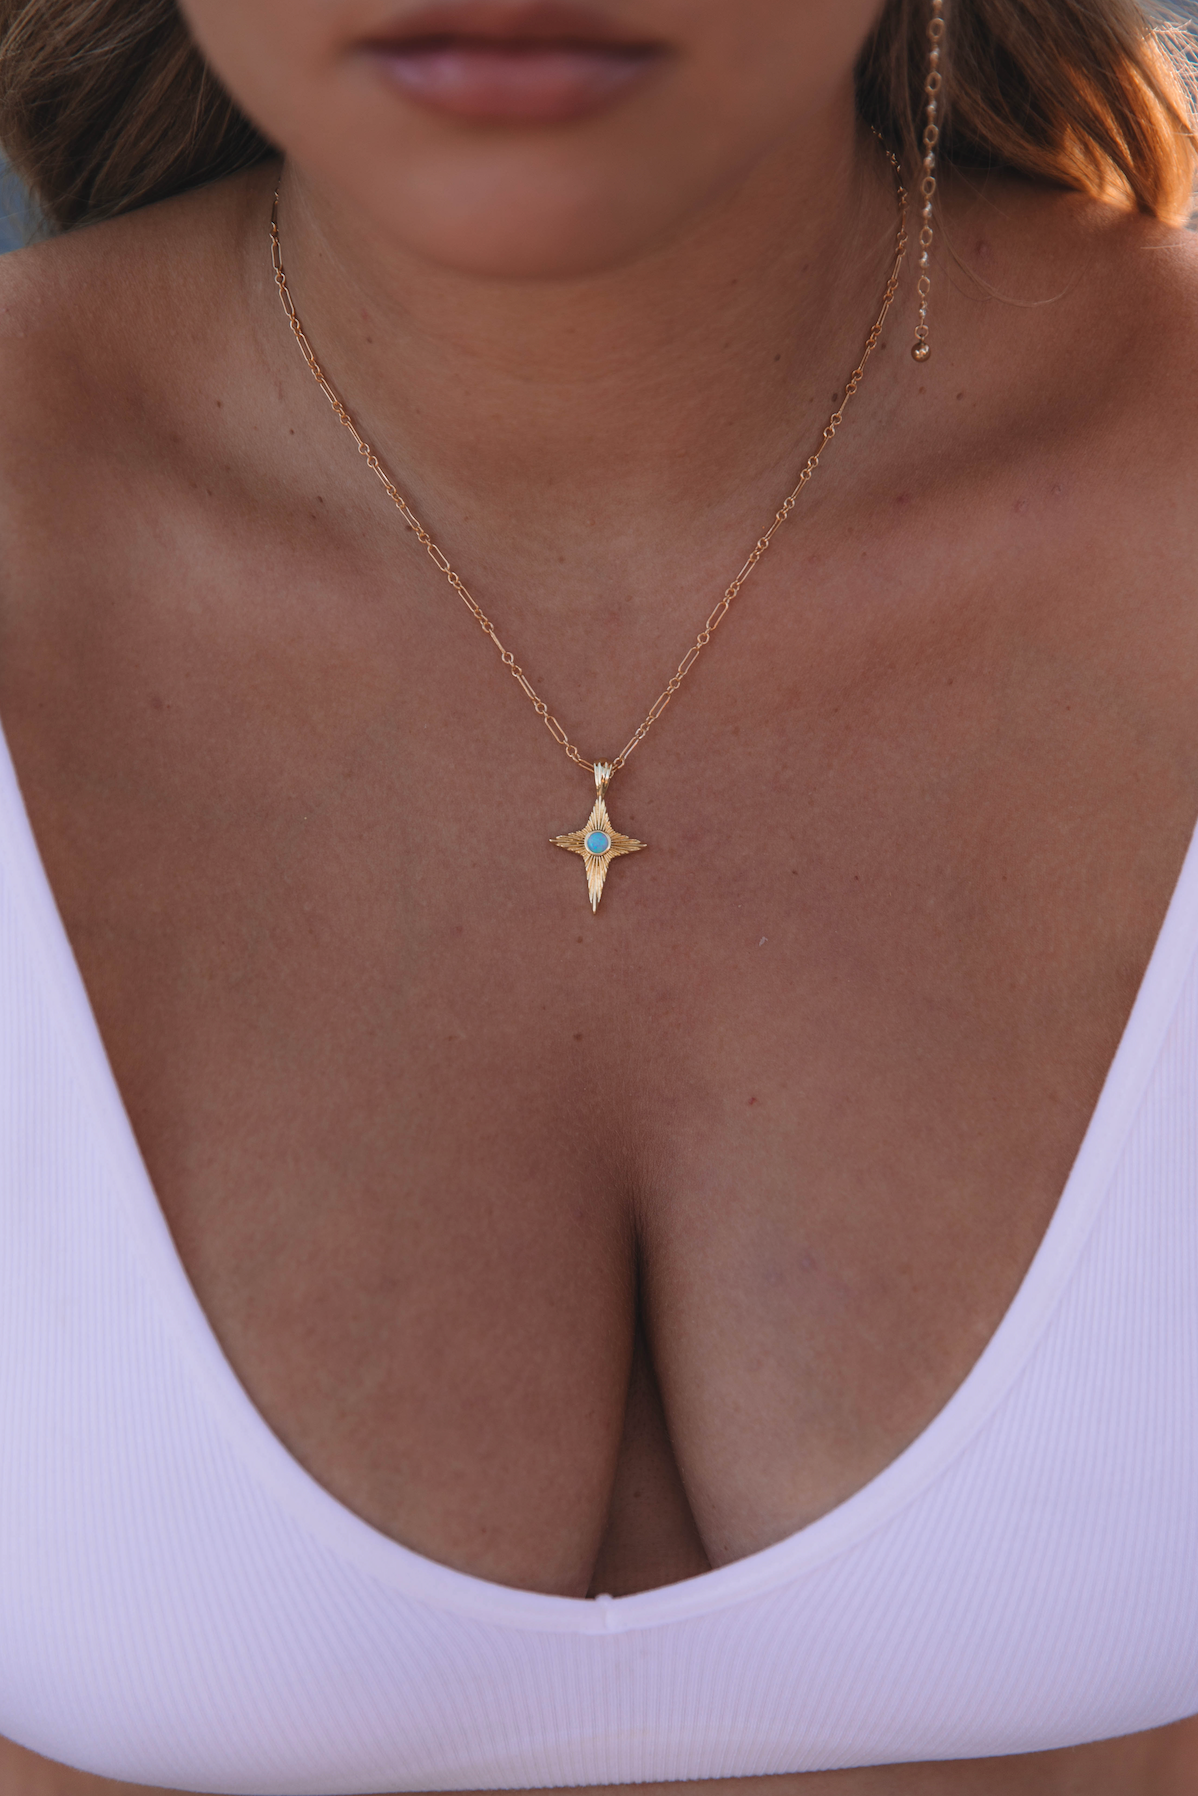 The Opal Celestial Star Necklace